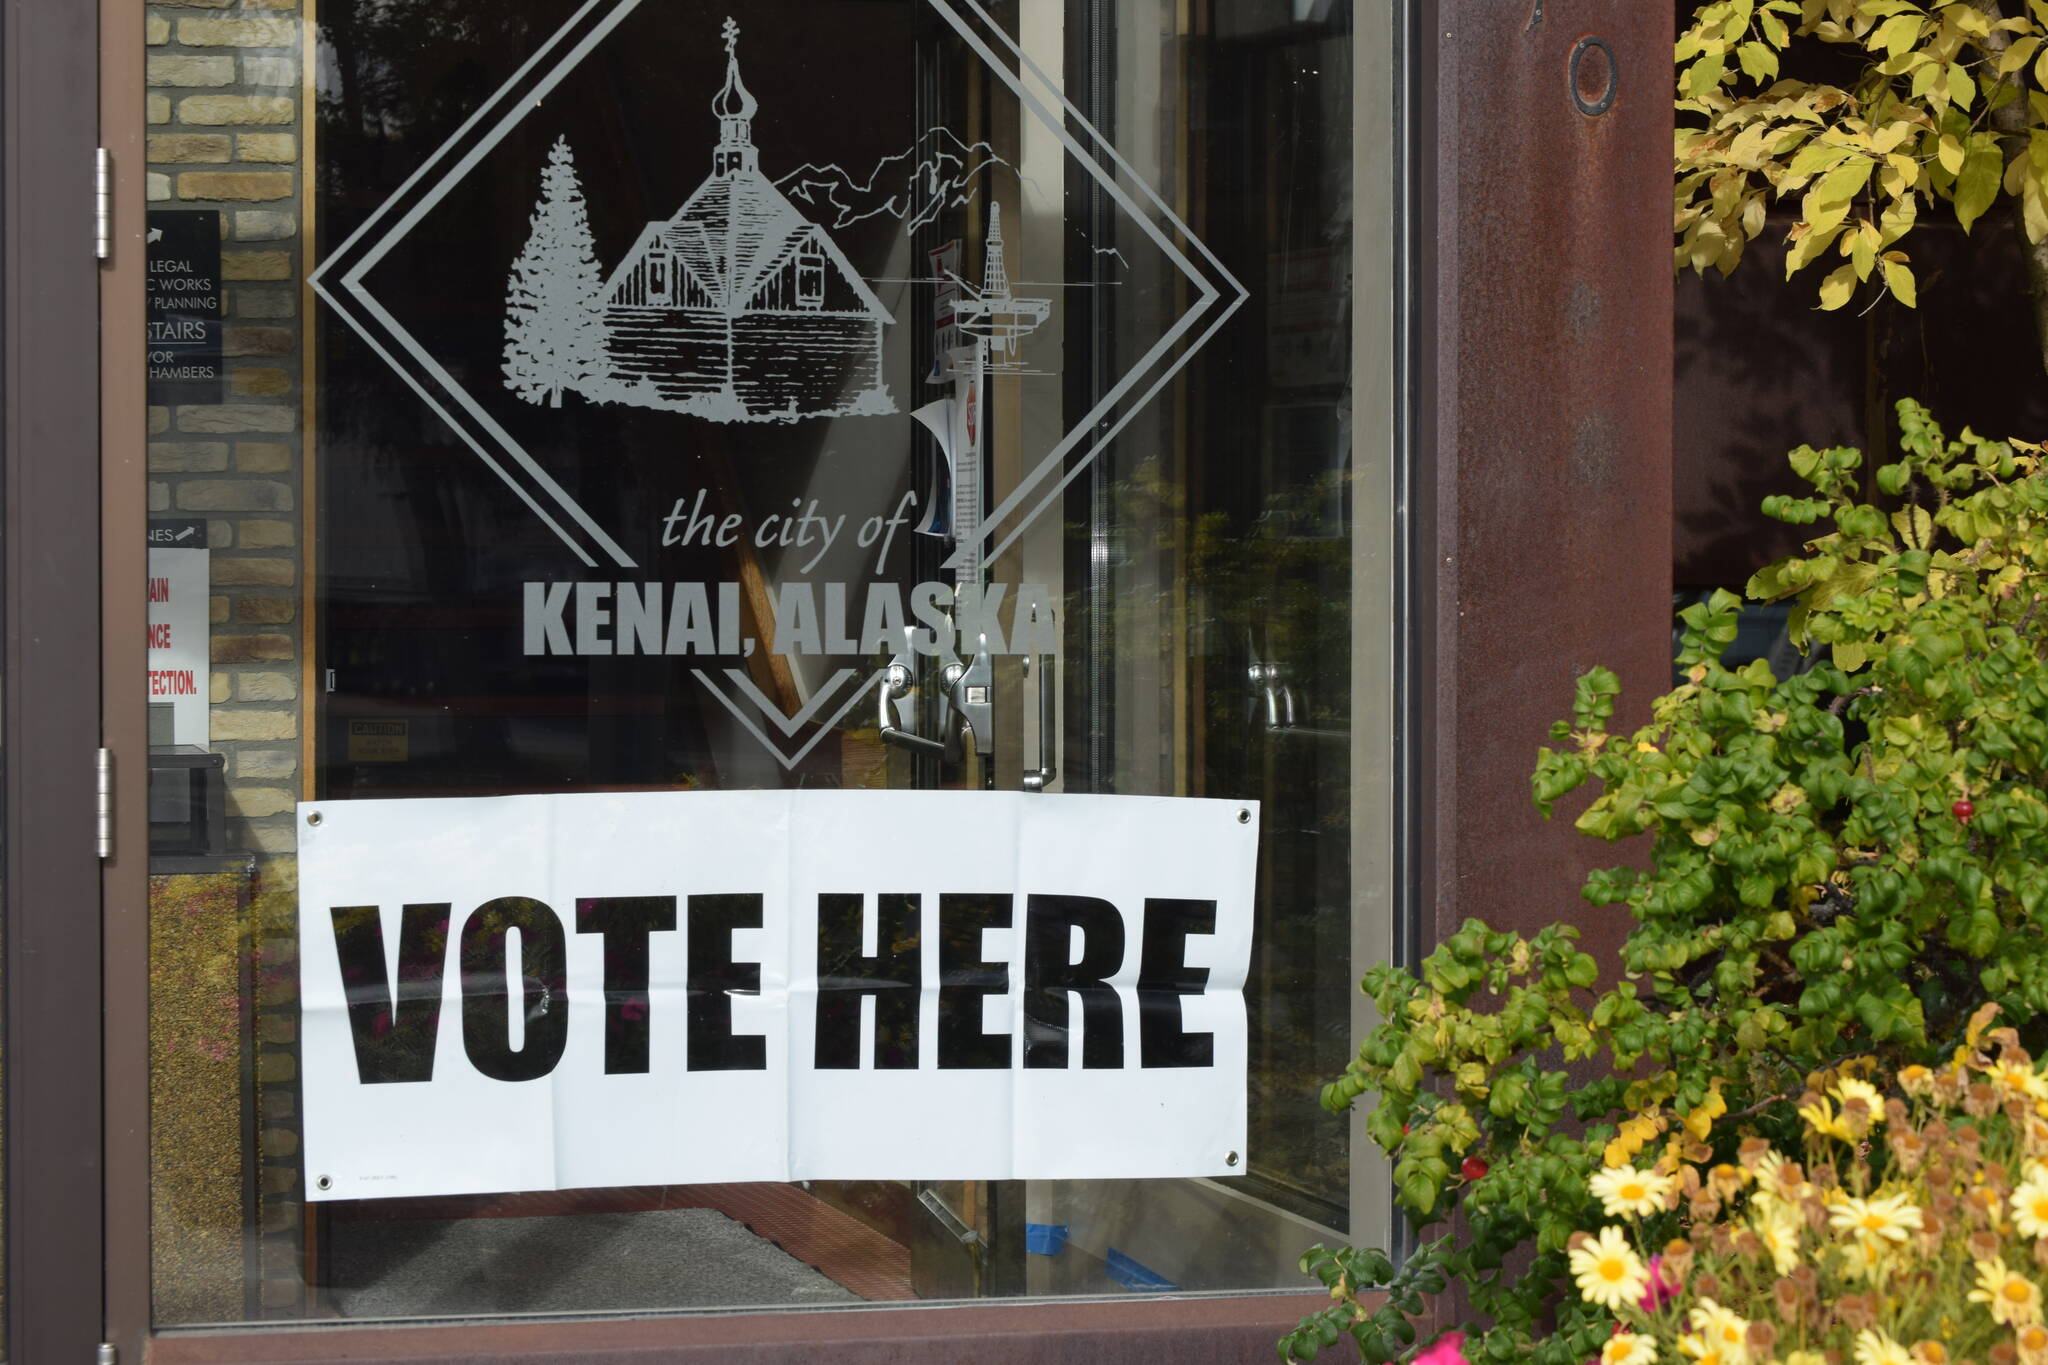 A “Vote Here” sign is seen at the City of Kenai building on Monday, Sept. 21, 2020, in Kenai, Alaska. (Peninsula Clarion file)